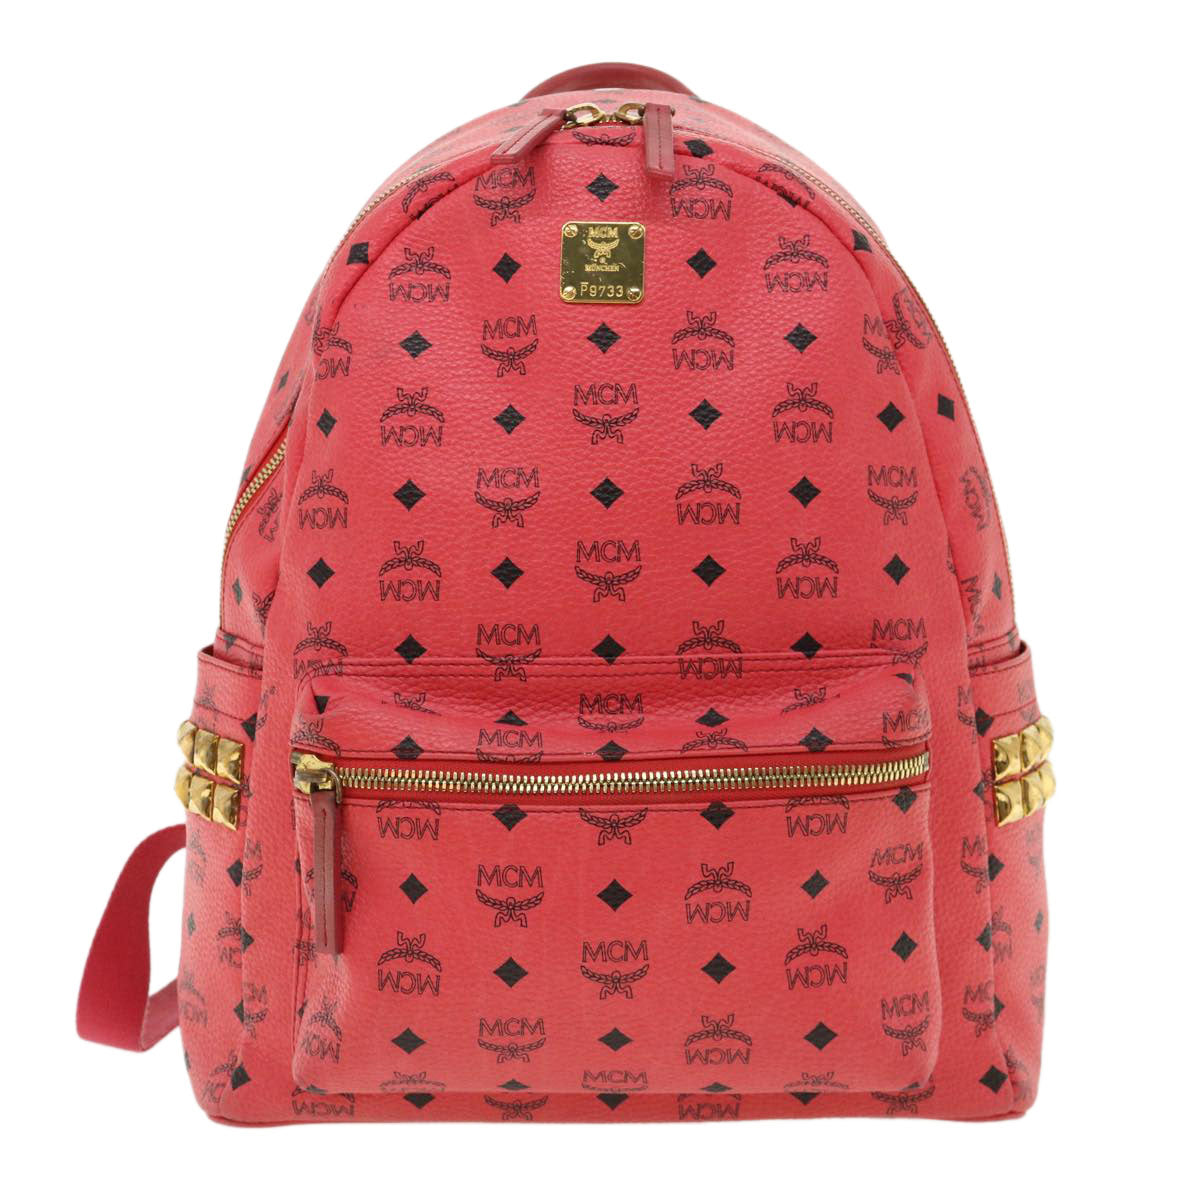 MCM Vicetos Backpack PVC Leather Pink Auth yk5128